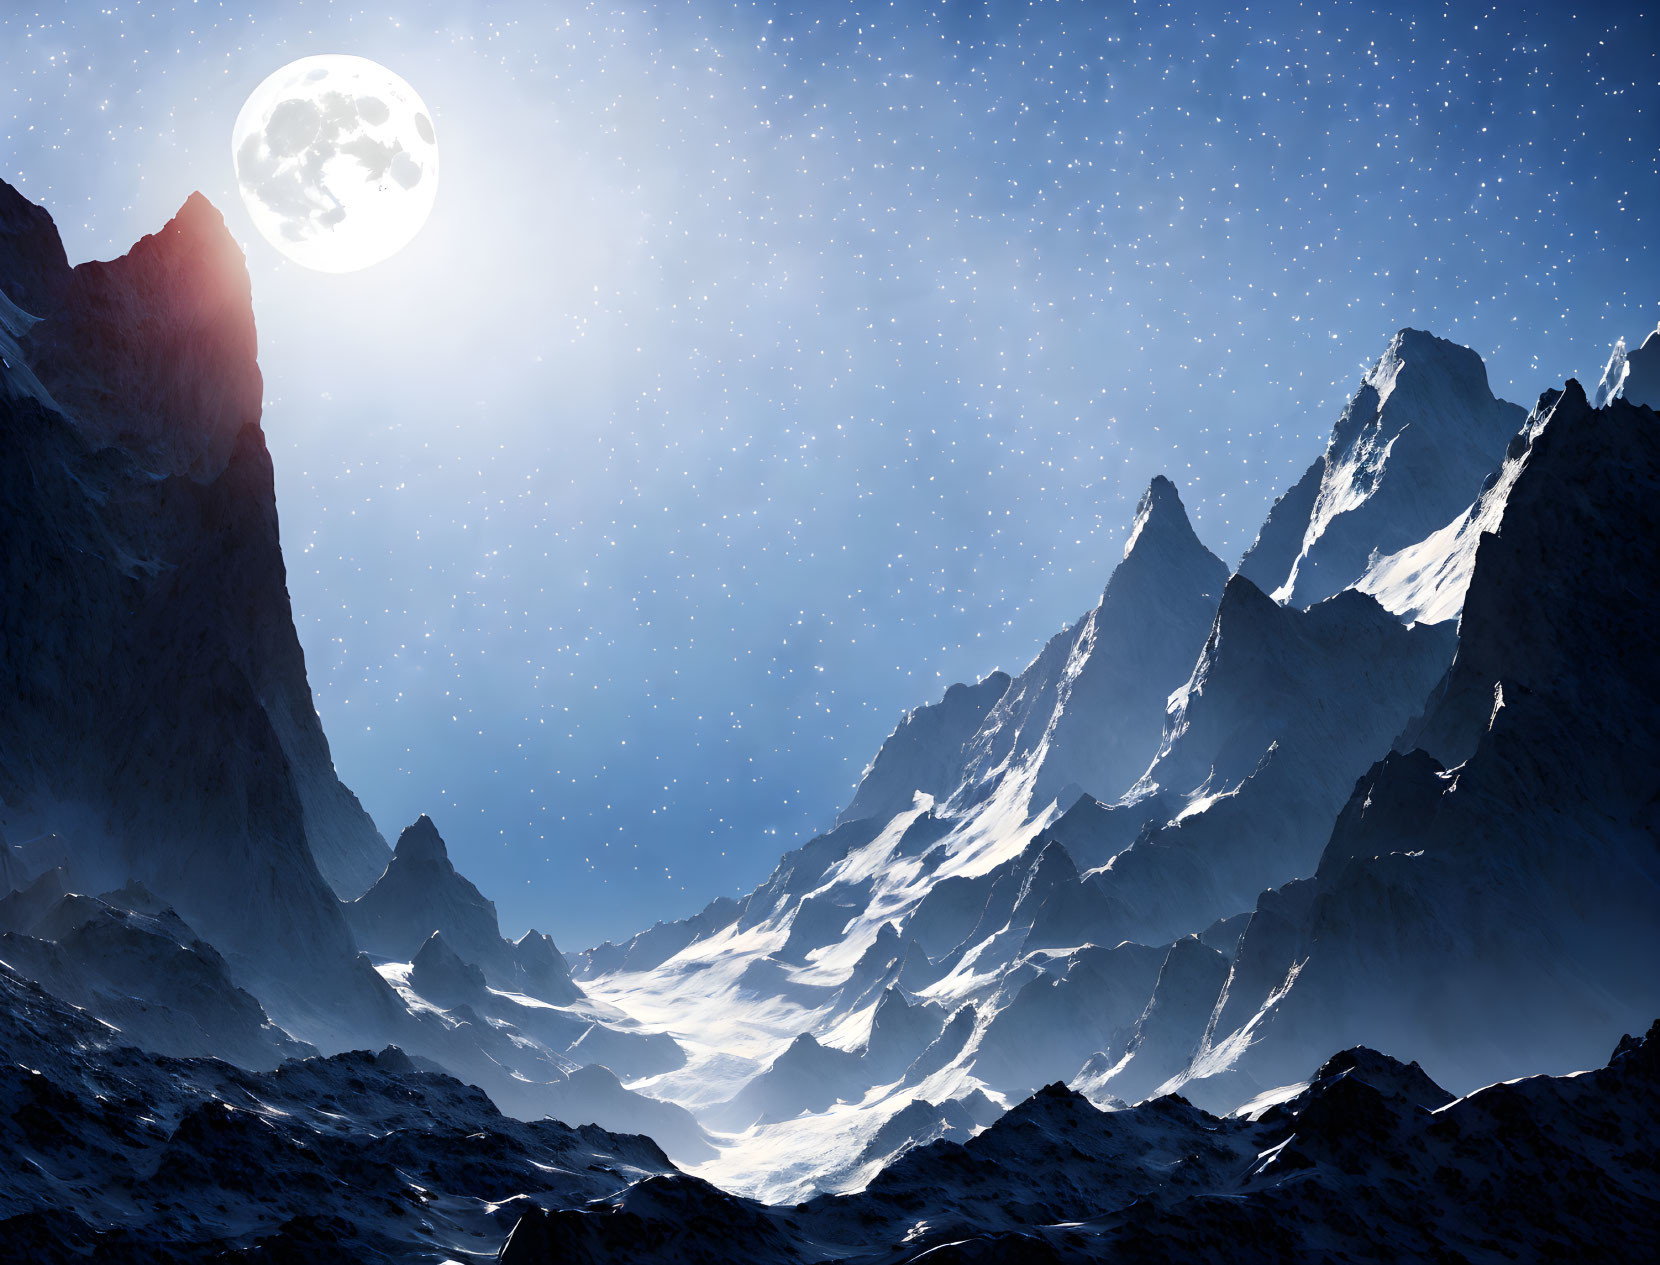 moon above the mountains